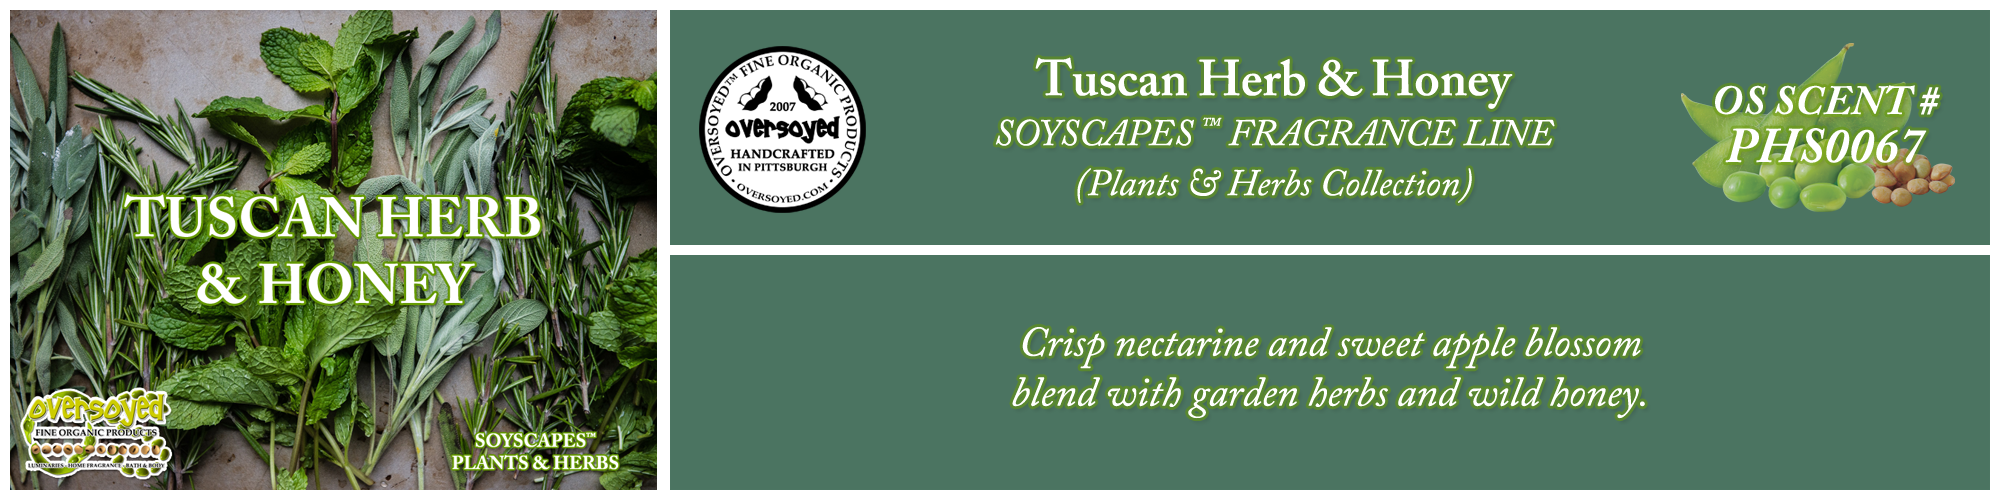 Tuscan Herb & Honey Handcrafted Products Collection